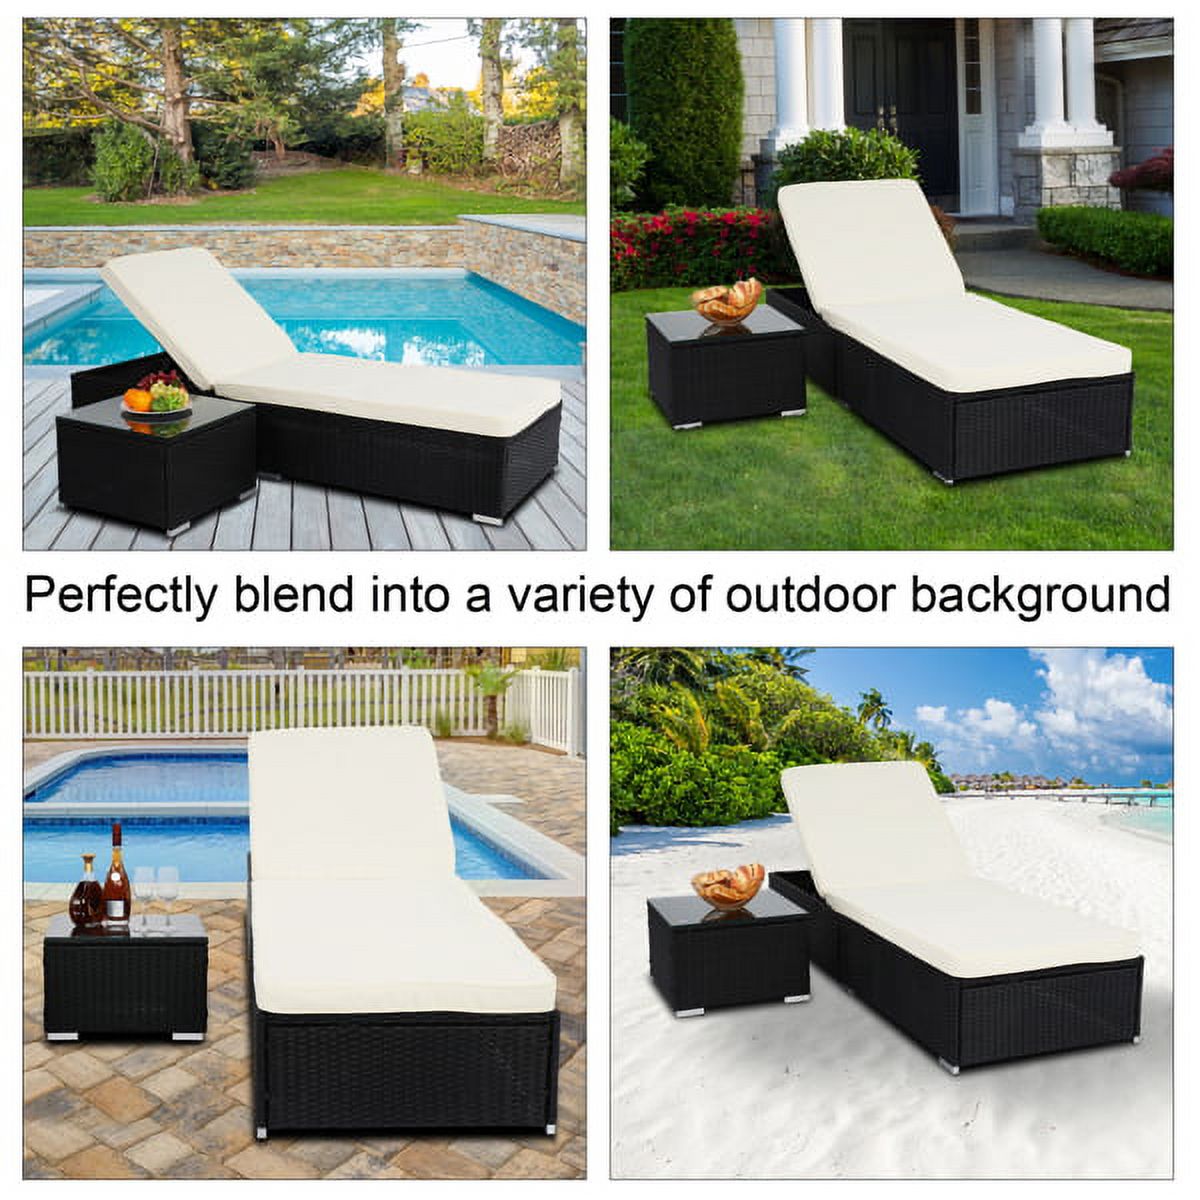 Lounge Chaise Outdoor with Tea Table, 5-Position Adjustable Reclining Cushioned Bed Patio Deck Beach Pool Lounge Chair - image 4 of 9